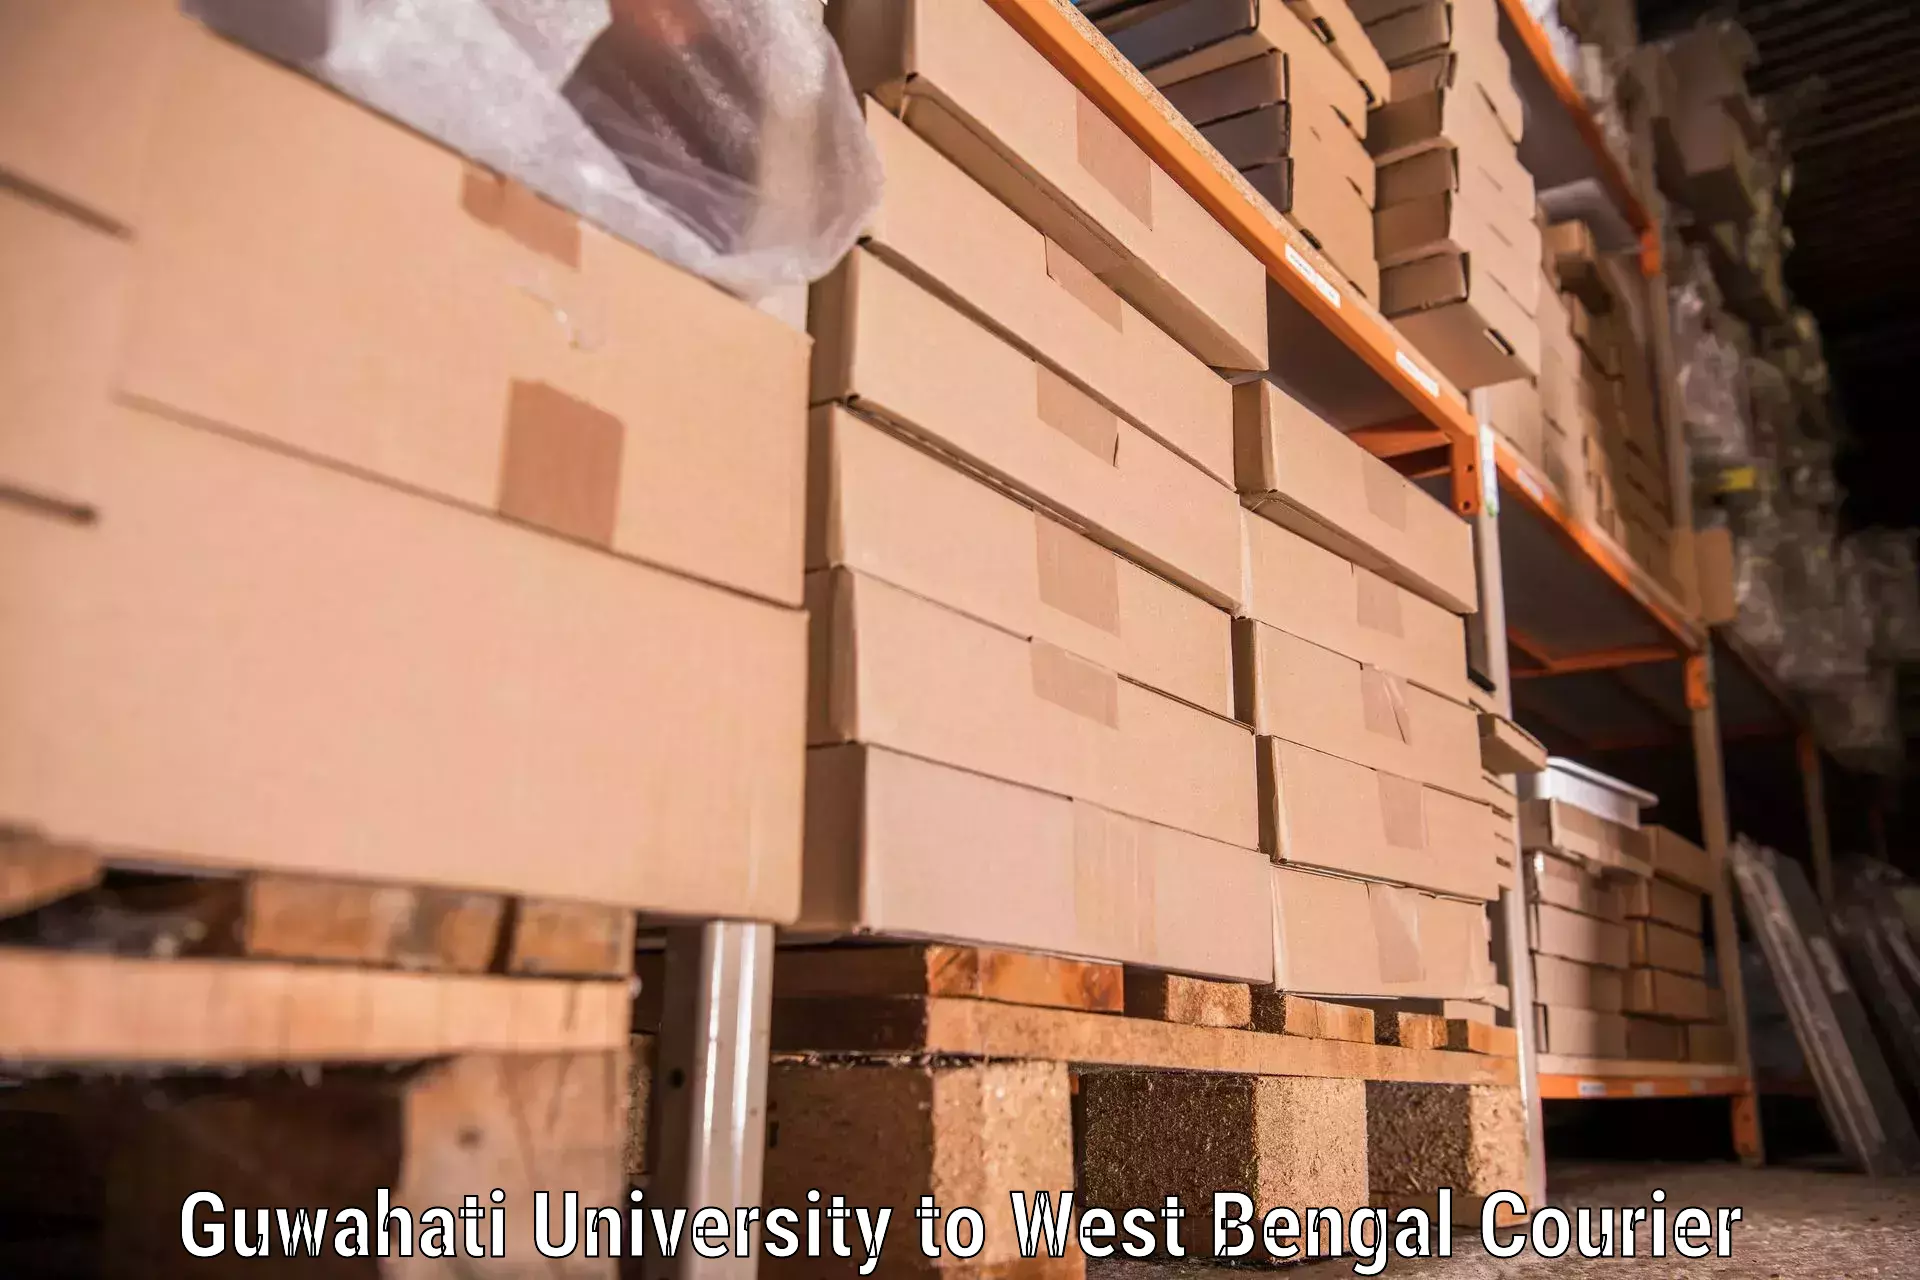 Home relocation services in Guwahati University to Kaliachak